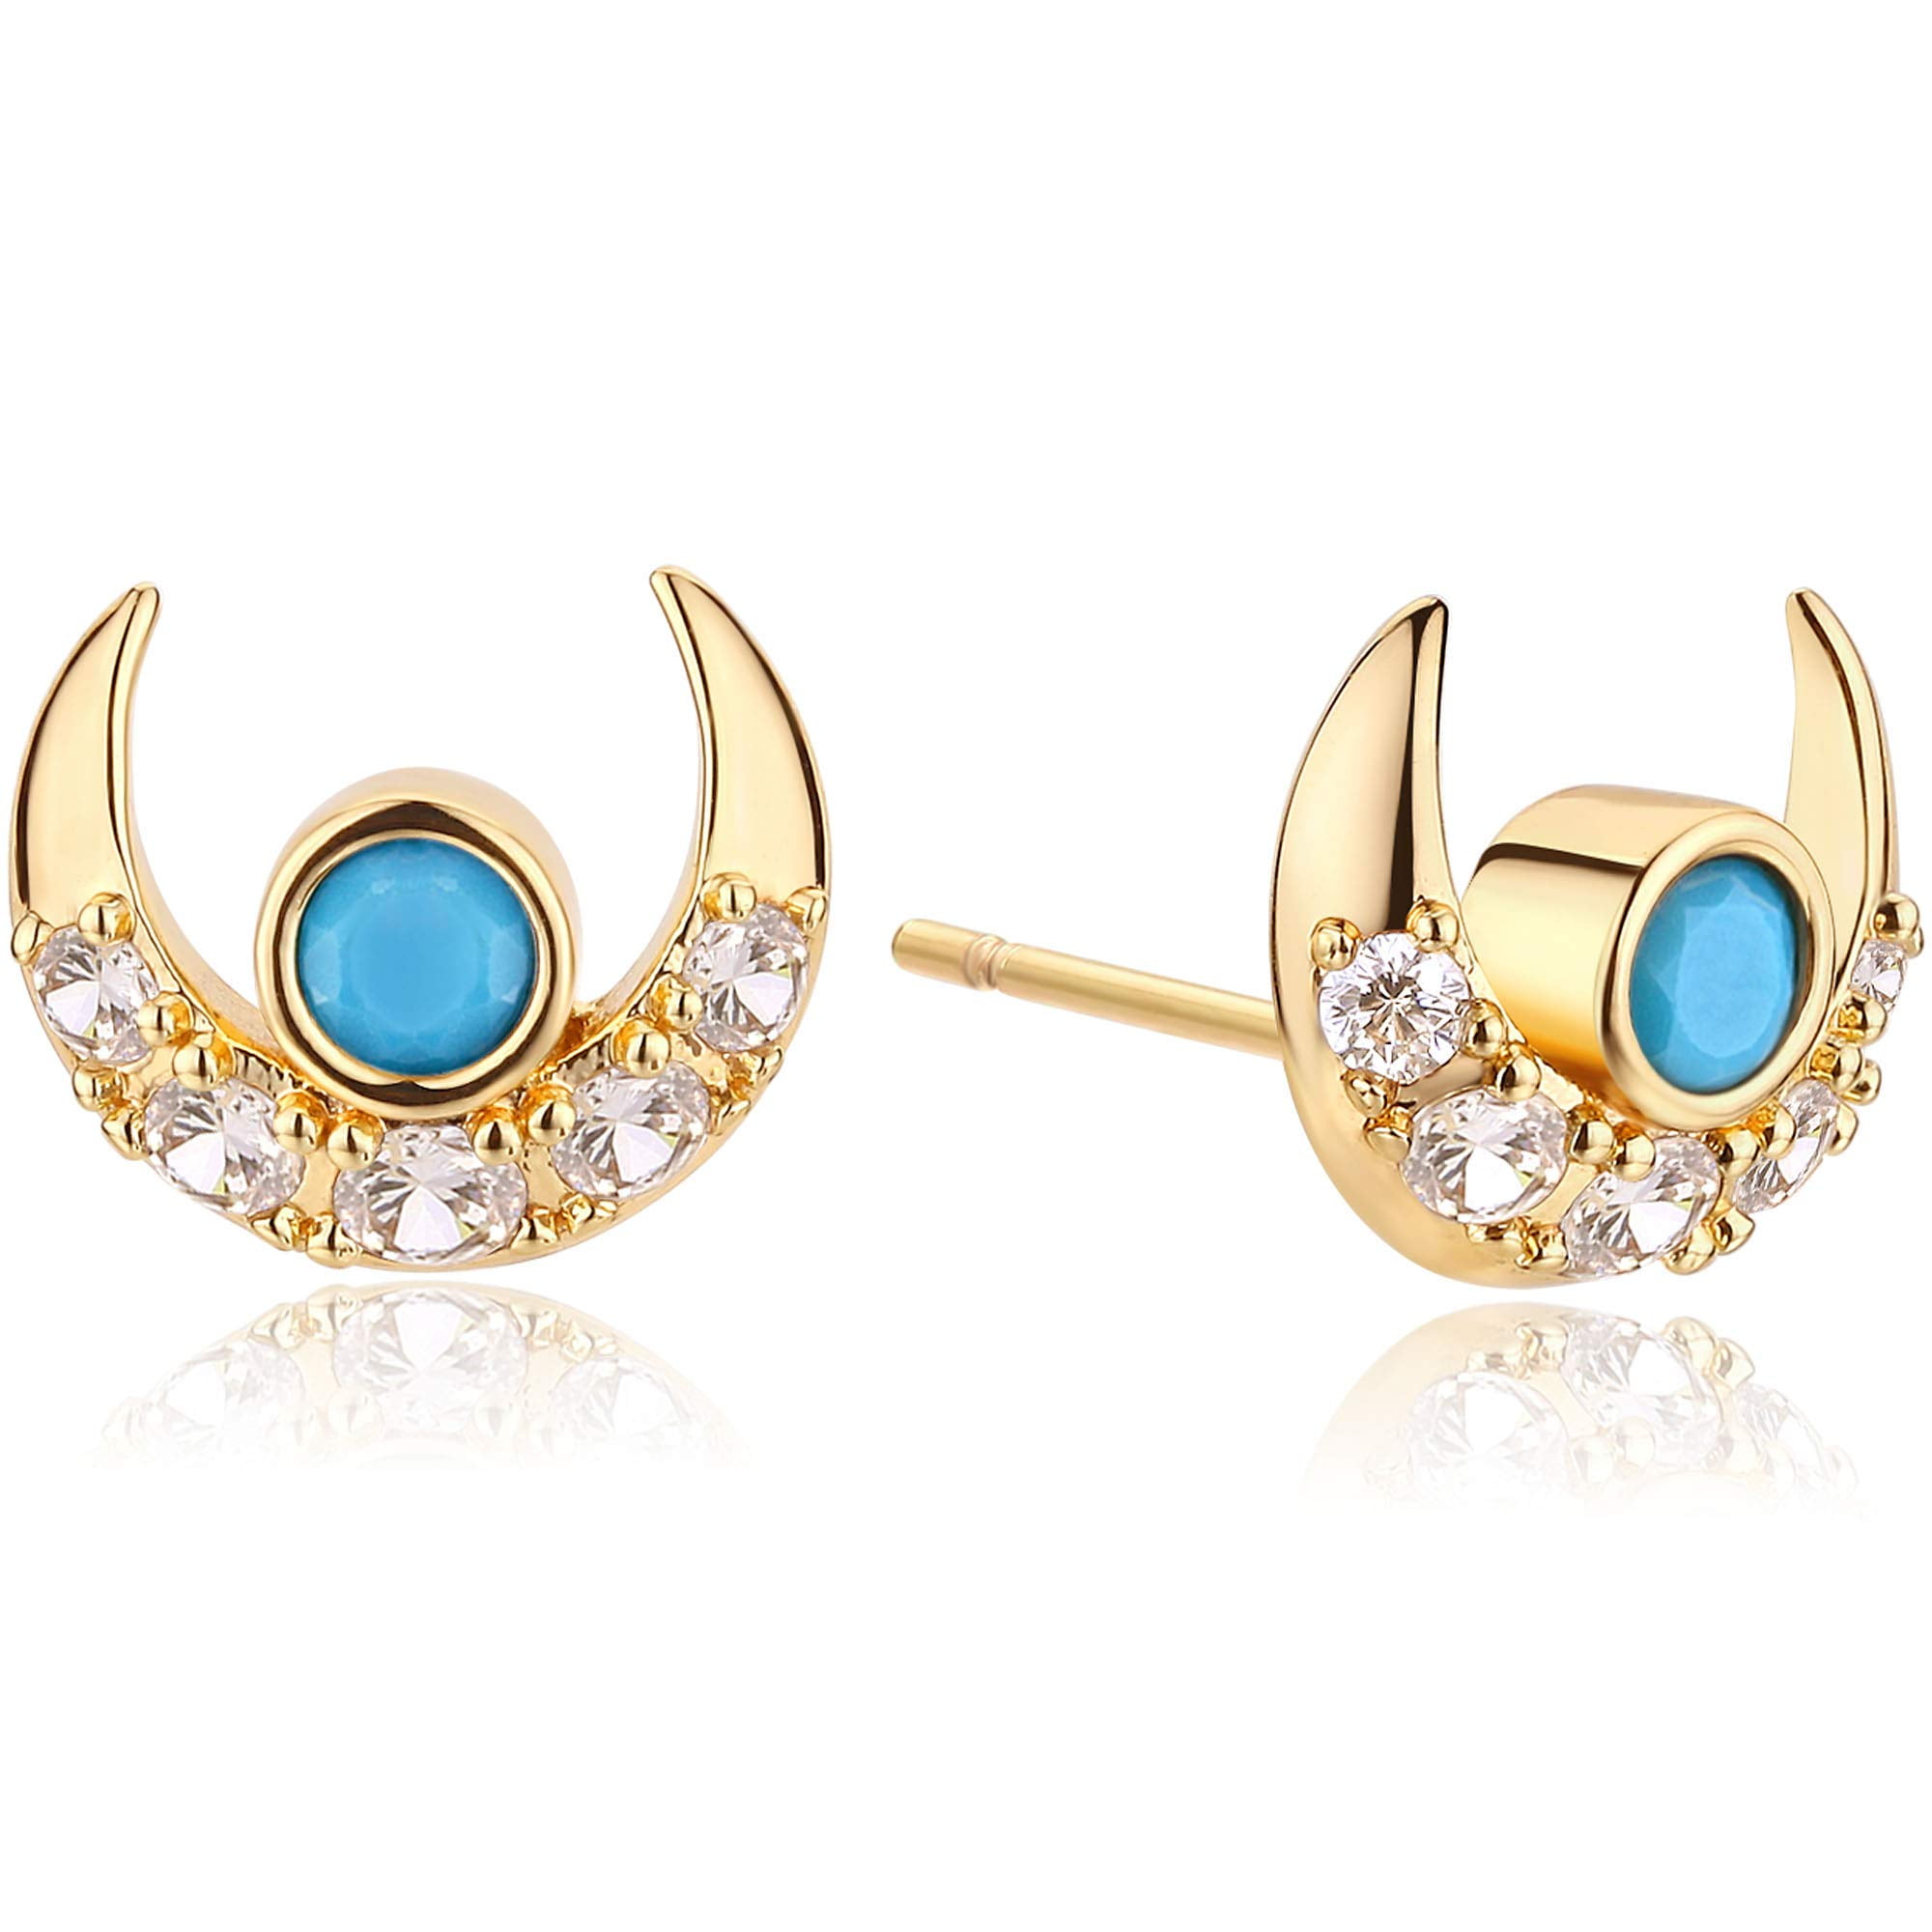 Yellow Gold Dazzlingrock Collection 14k Ball 5mm Stud Earrings with Screw Backings